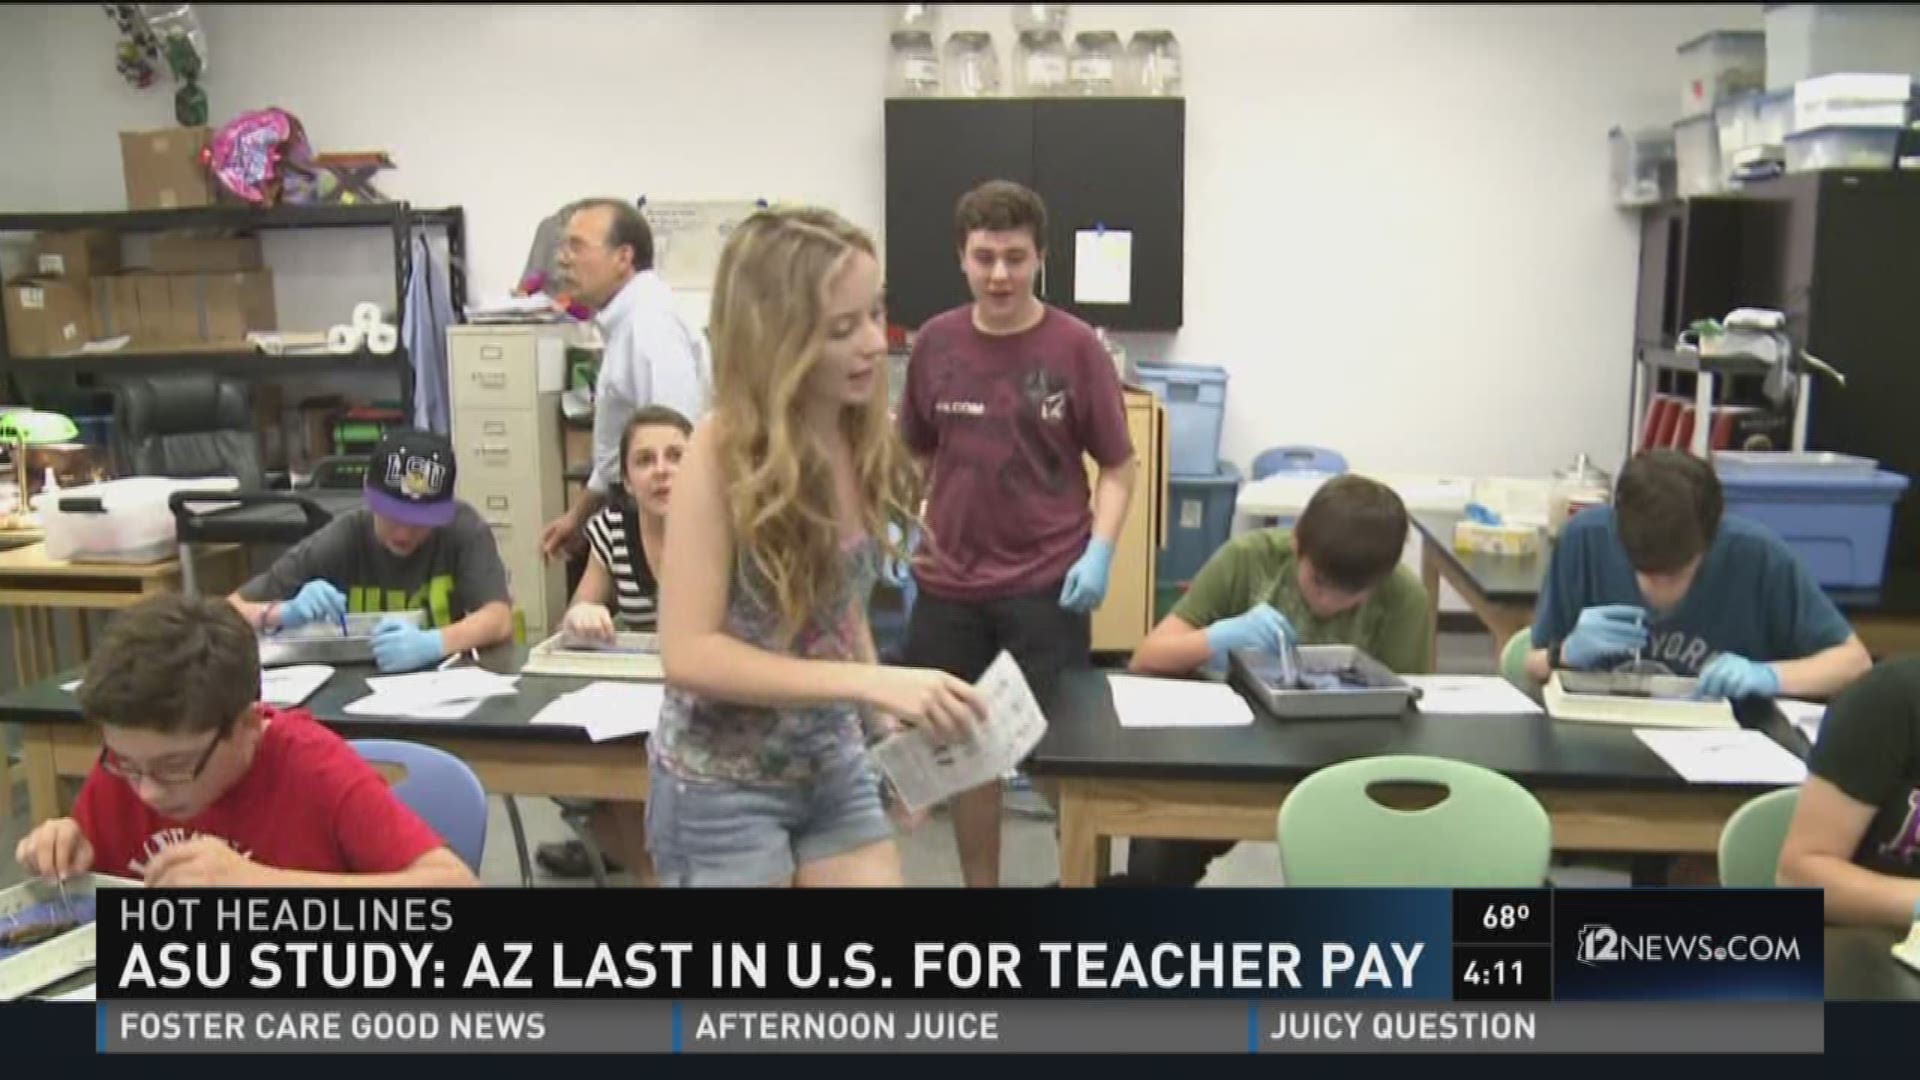 New study shows that Arizona has lowest paid teacher salaries in the nation.